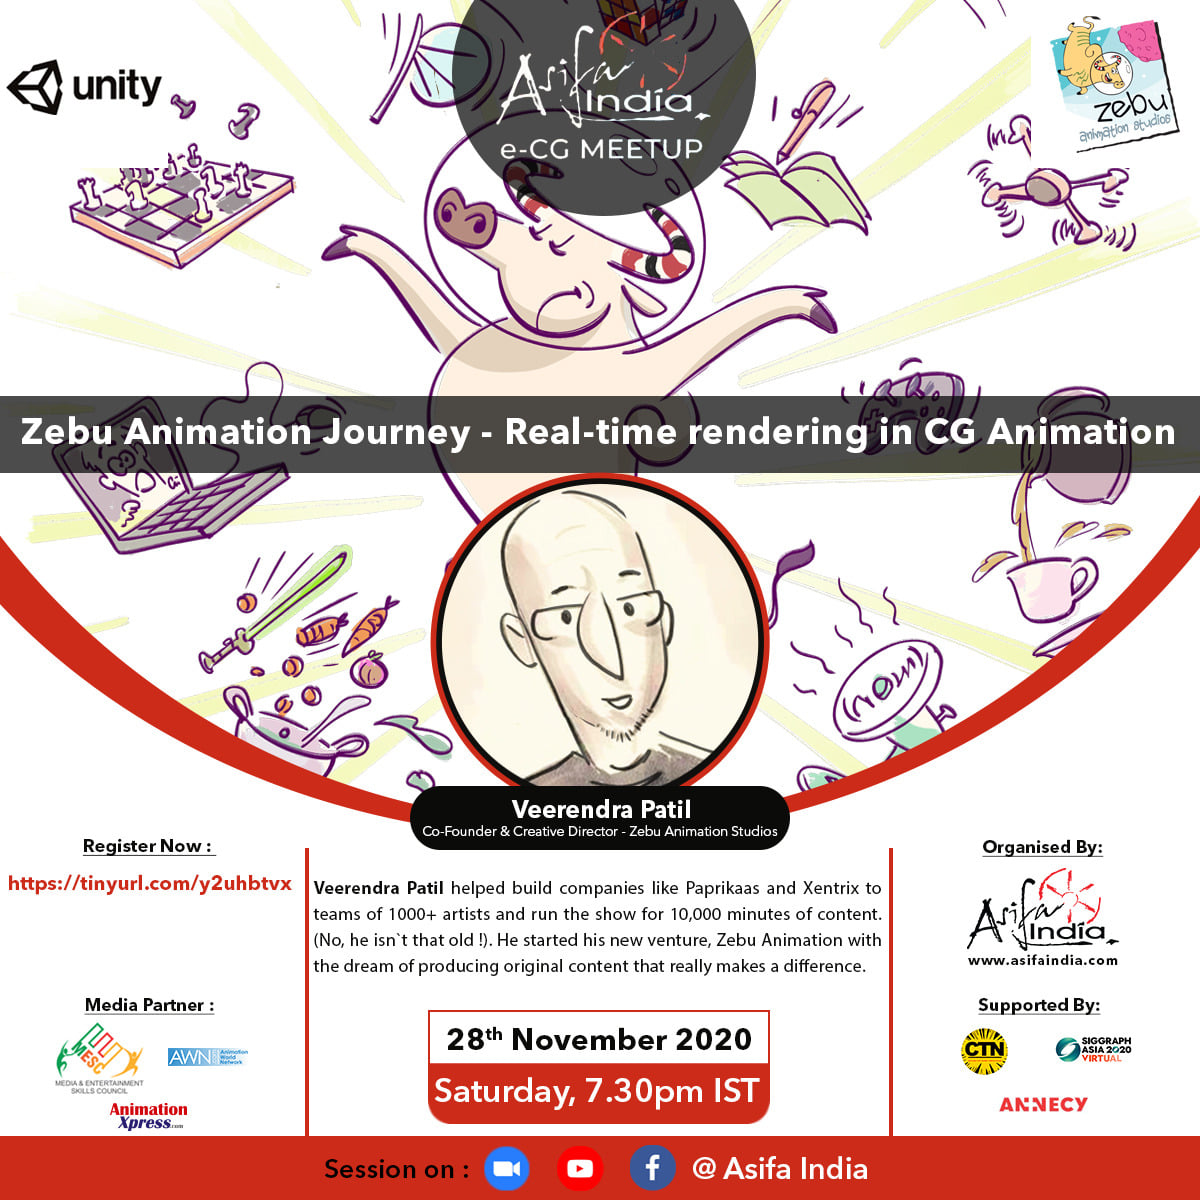 e-CG MEETUP 10 : Interaction with Veerendra Patil, Co-founder & Director of Zebu  Animation Studios, – Asifa India